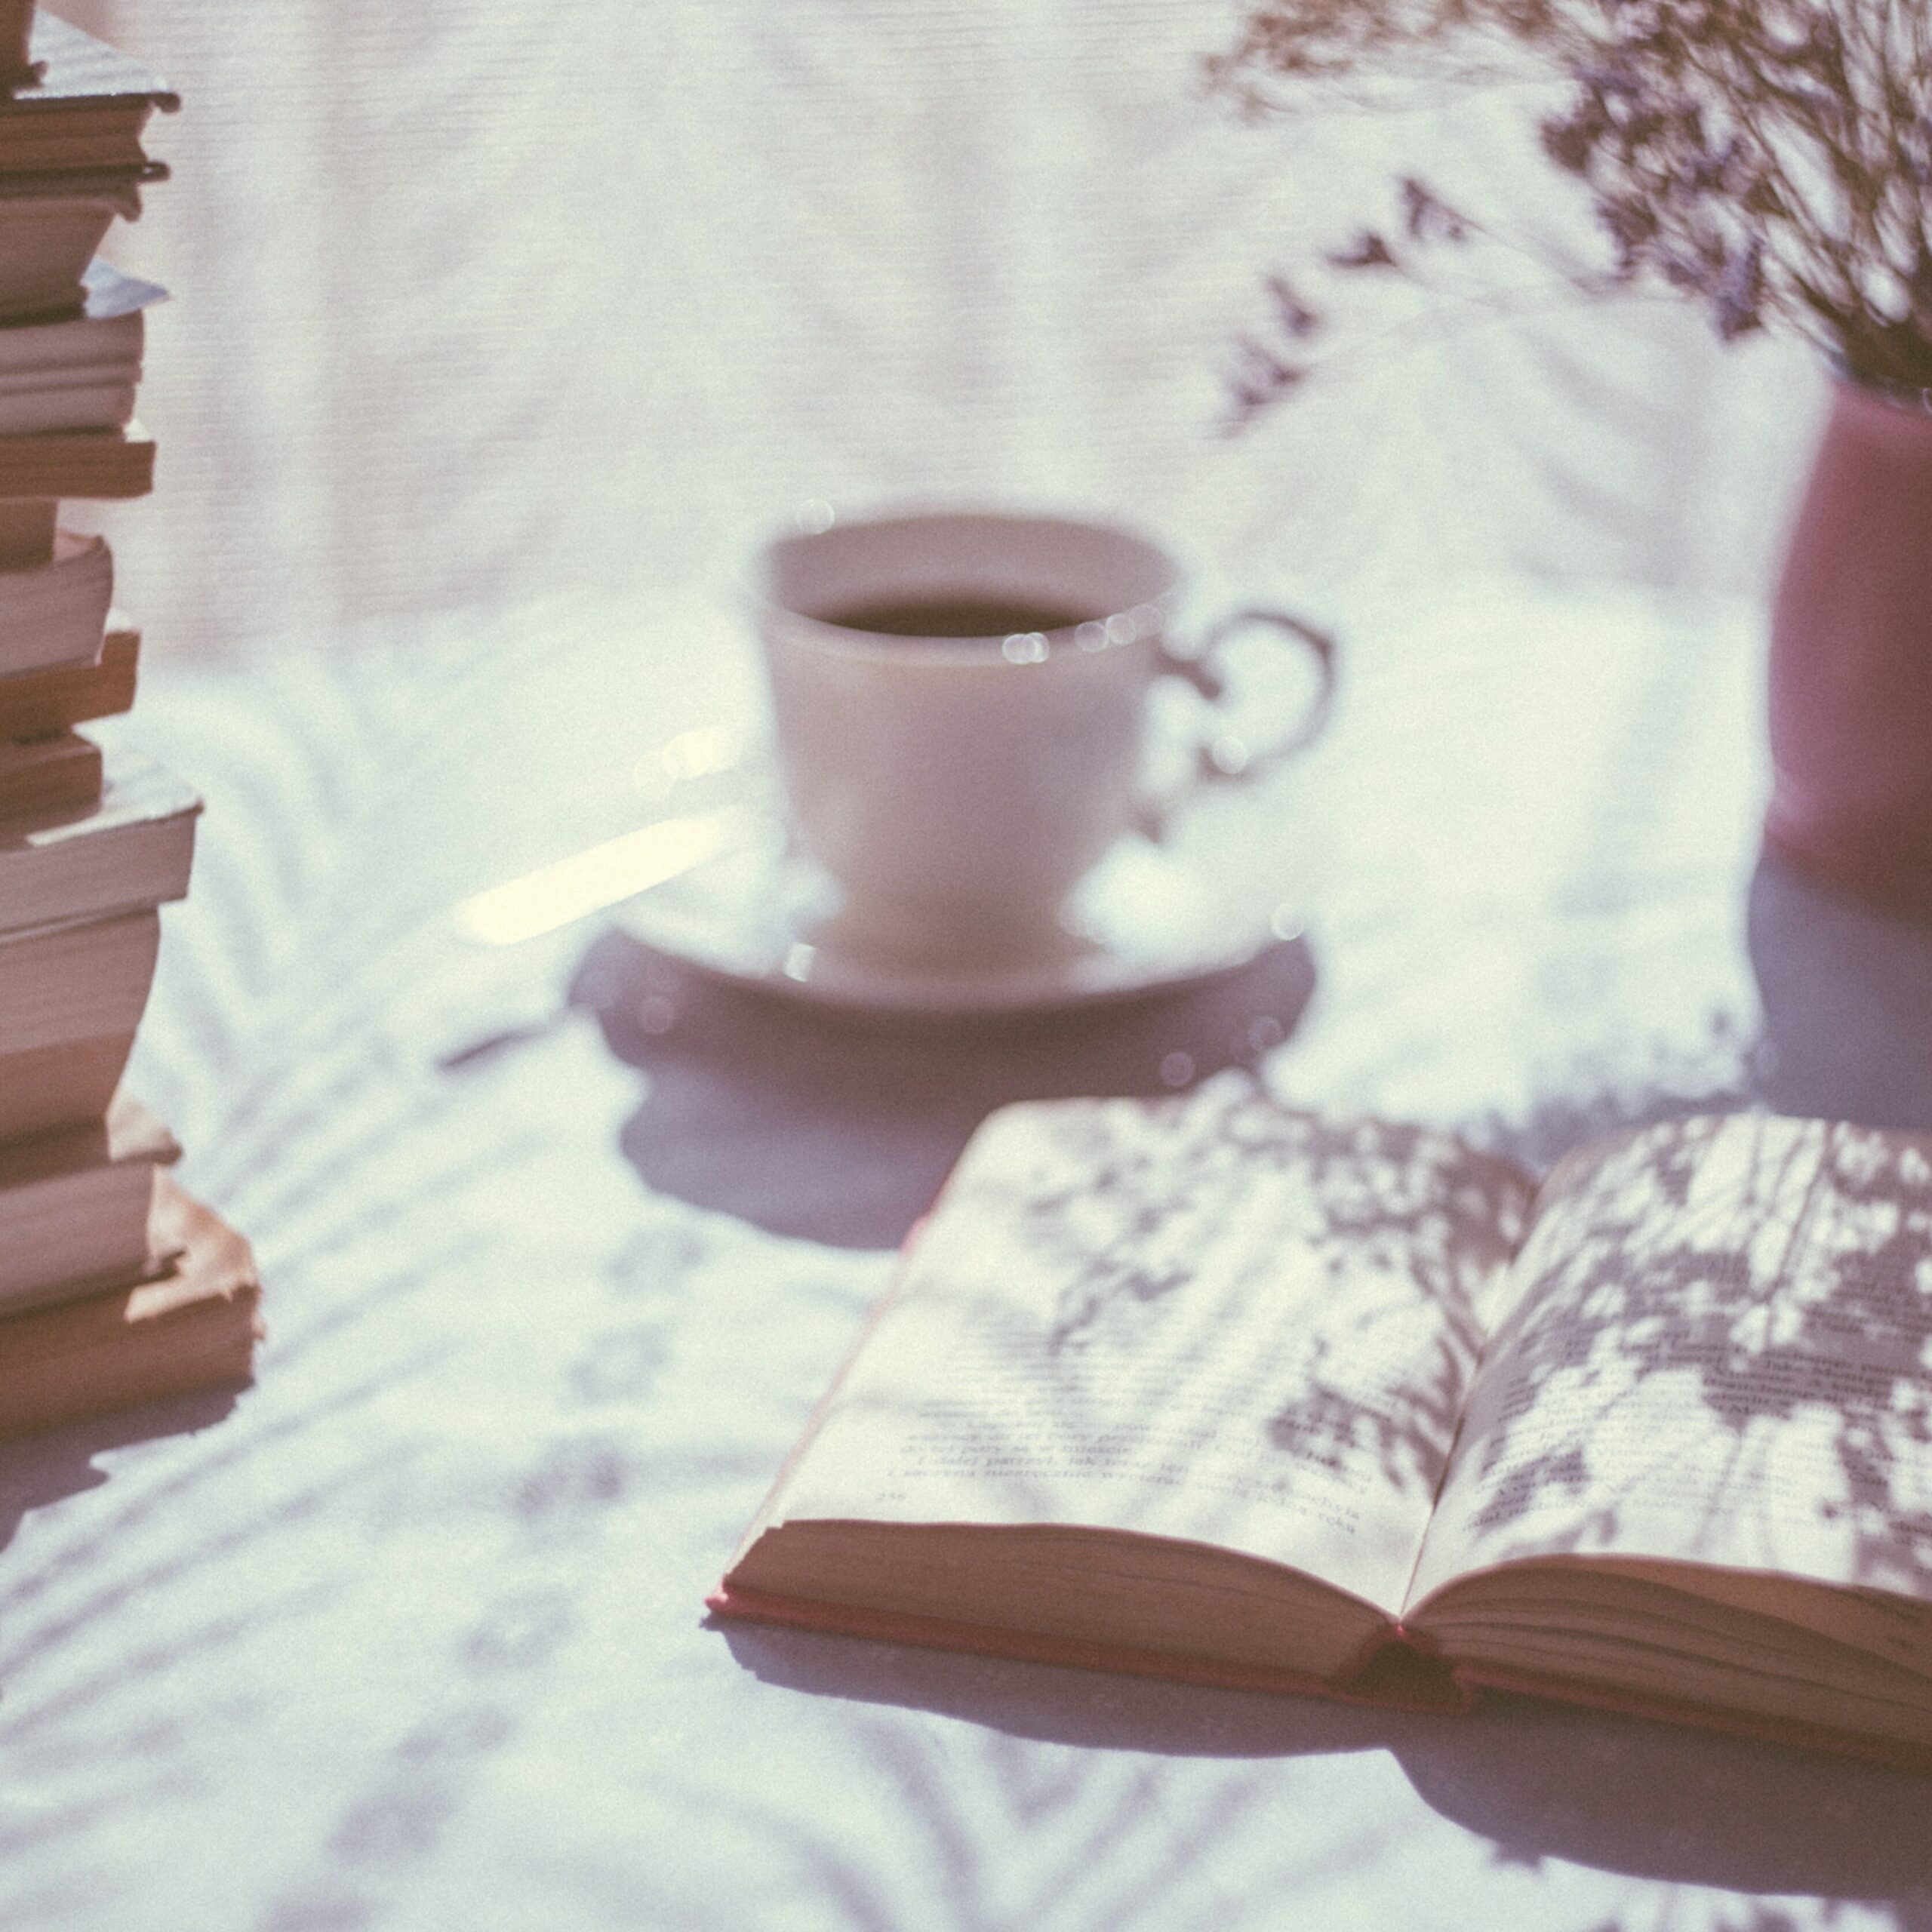 photo of a coffee cup and a book on the table. They lit by the sunlight coming through the window. Off to the sides are a stack of books and a potted plant